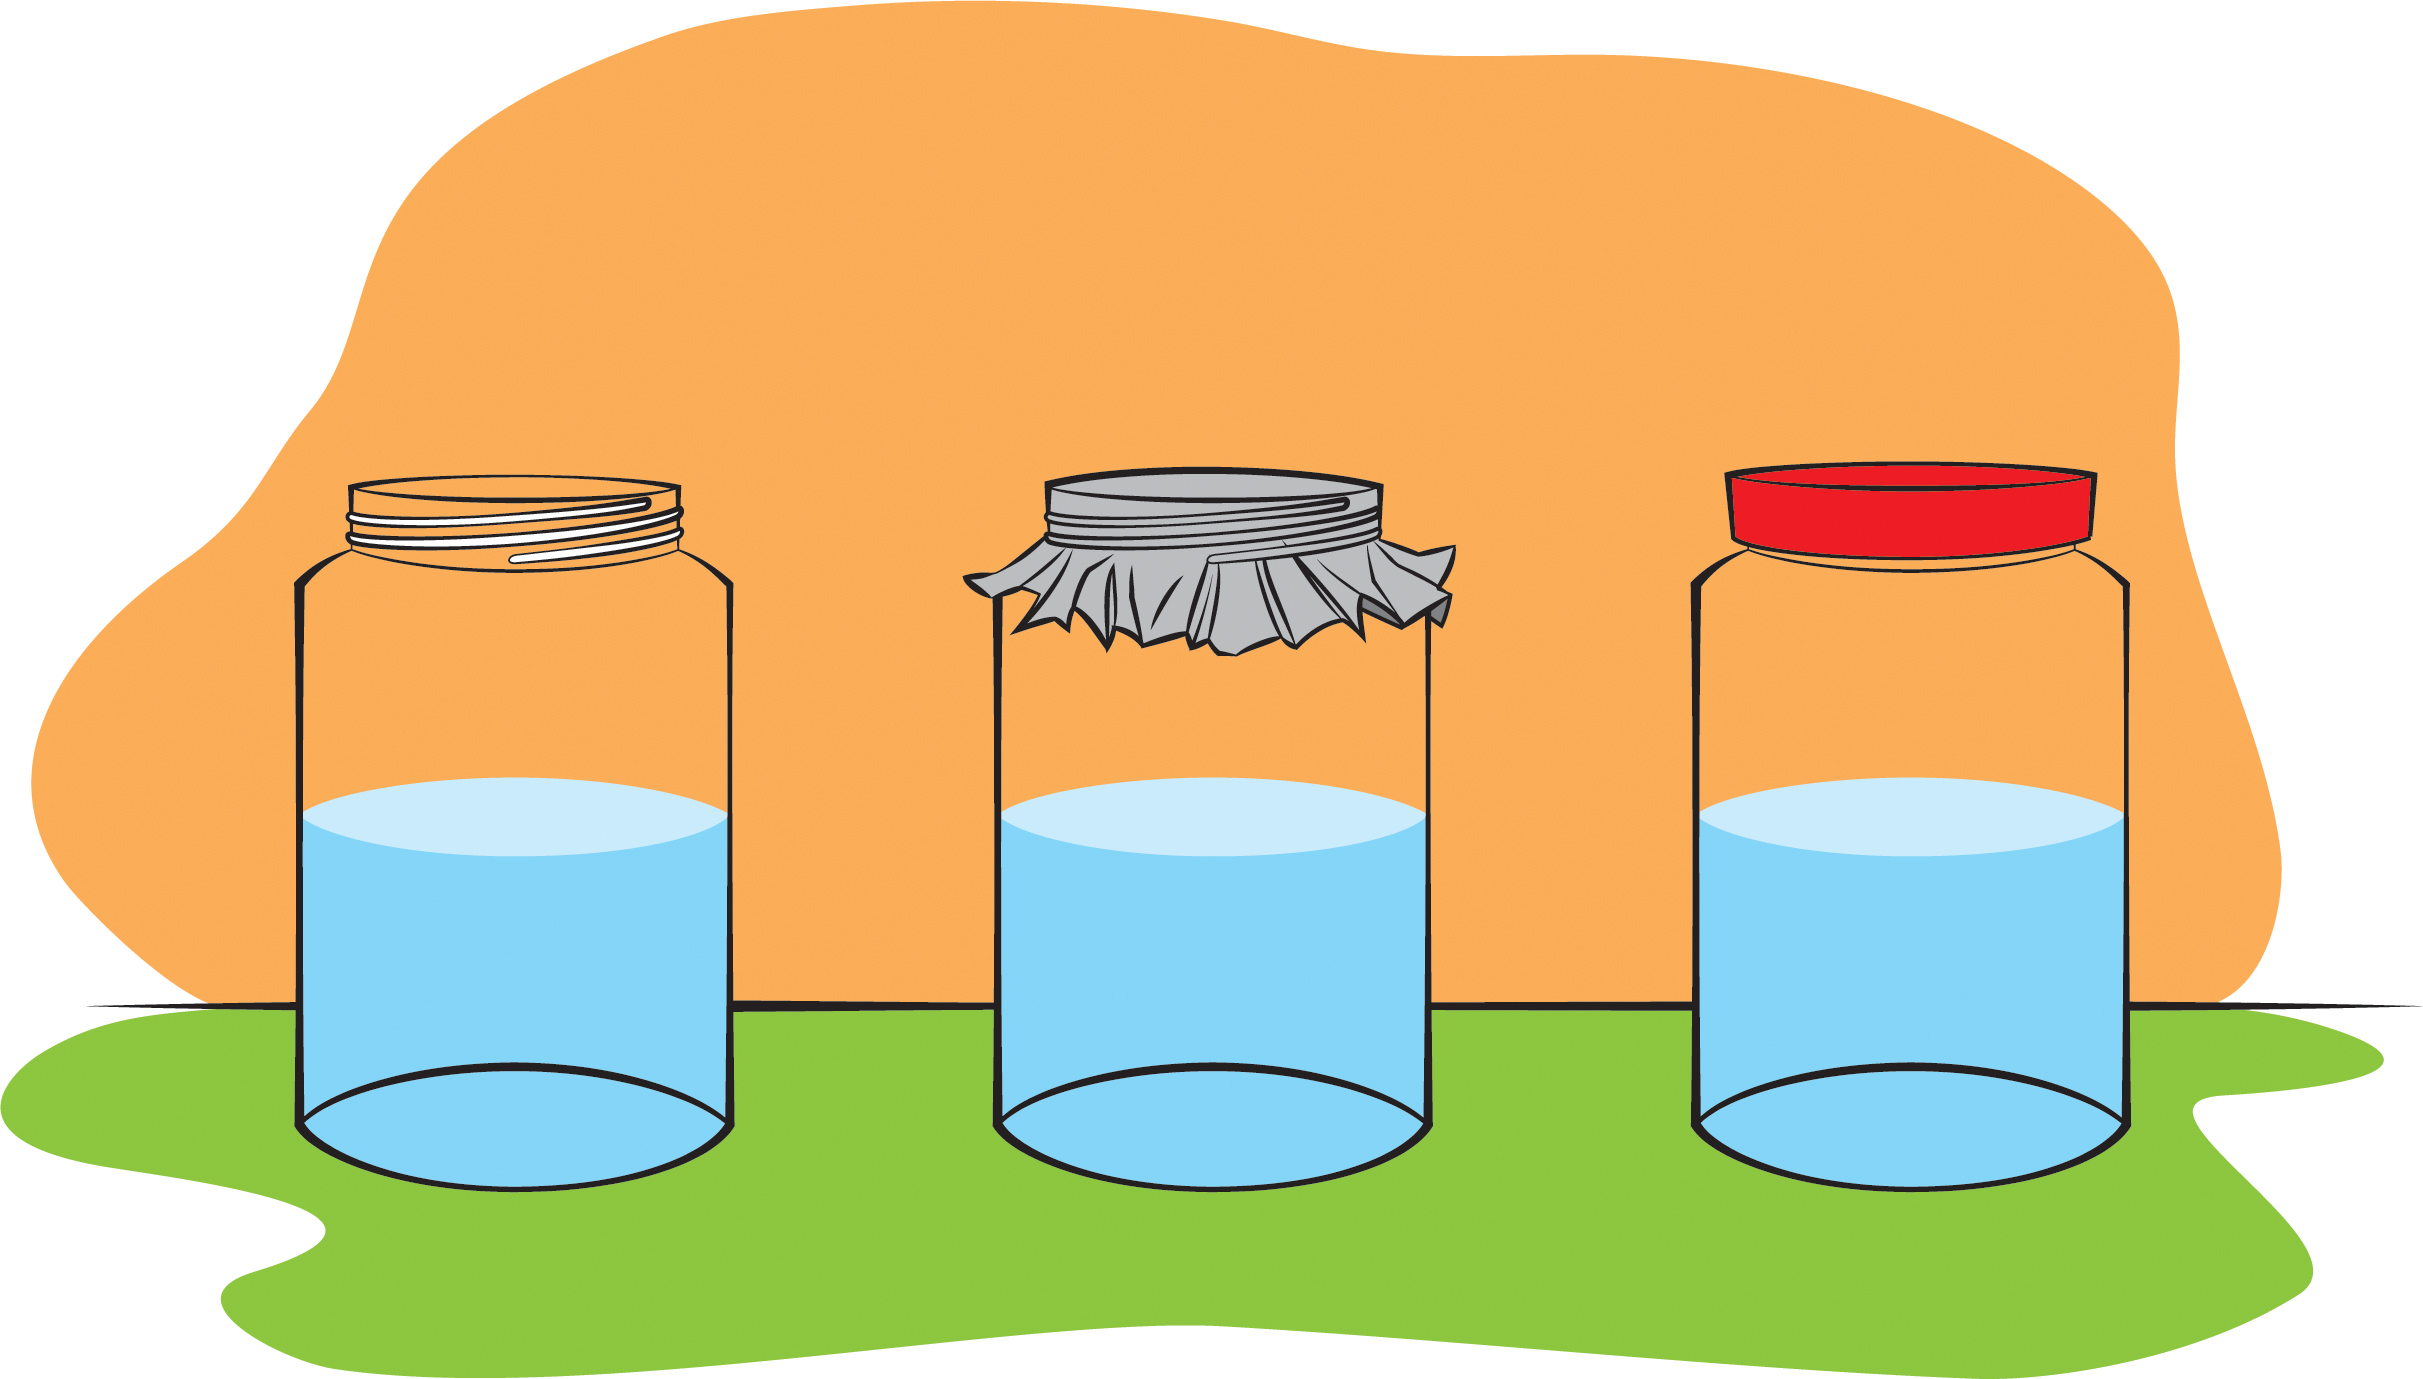 Water in three jars: no lid, foil lid, and tightly sealed lid. 